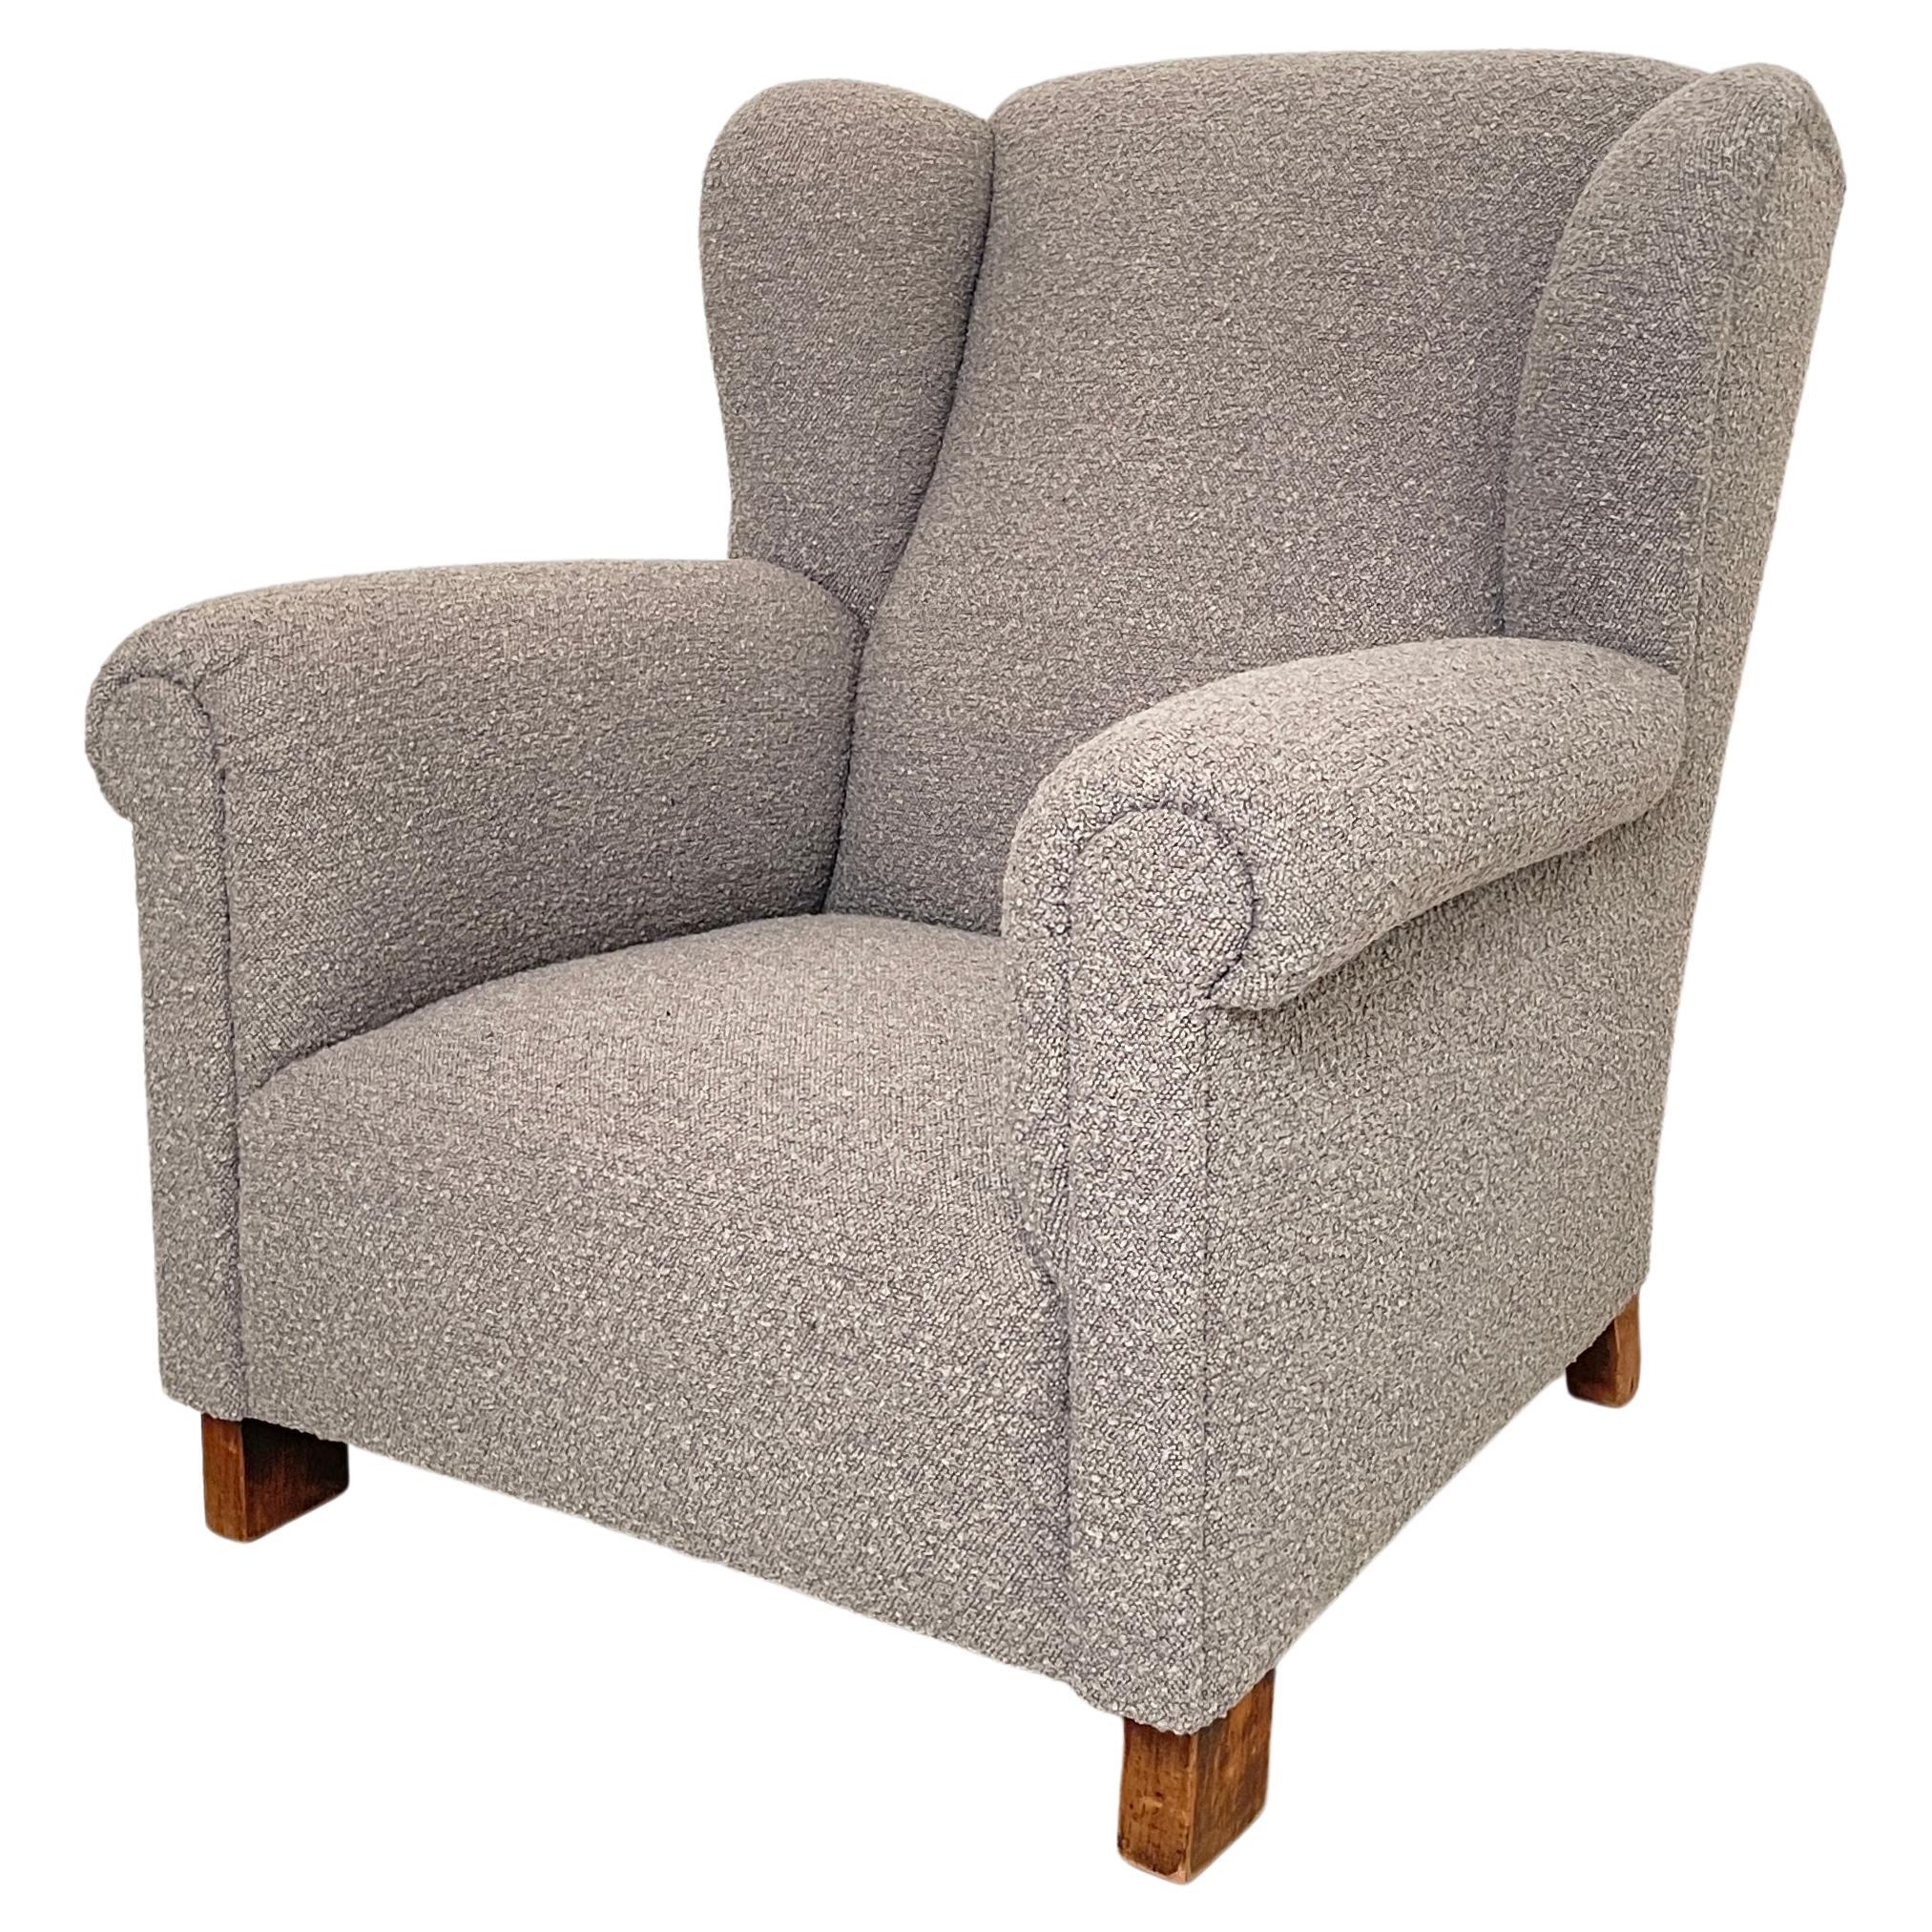 German Art Deco Wingback Chair in Gray Boucle Fabric, 1925 For Sale